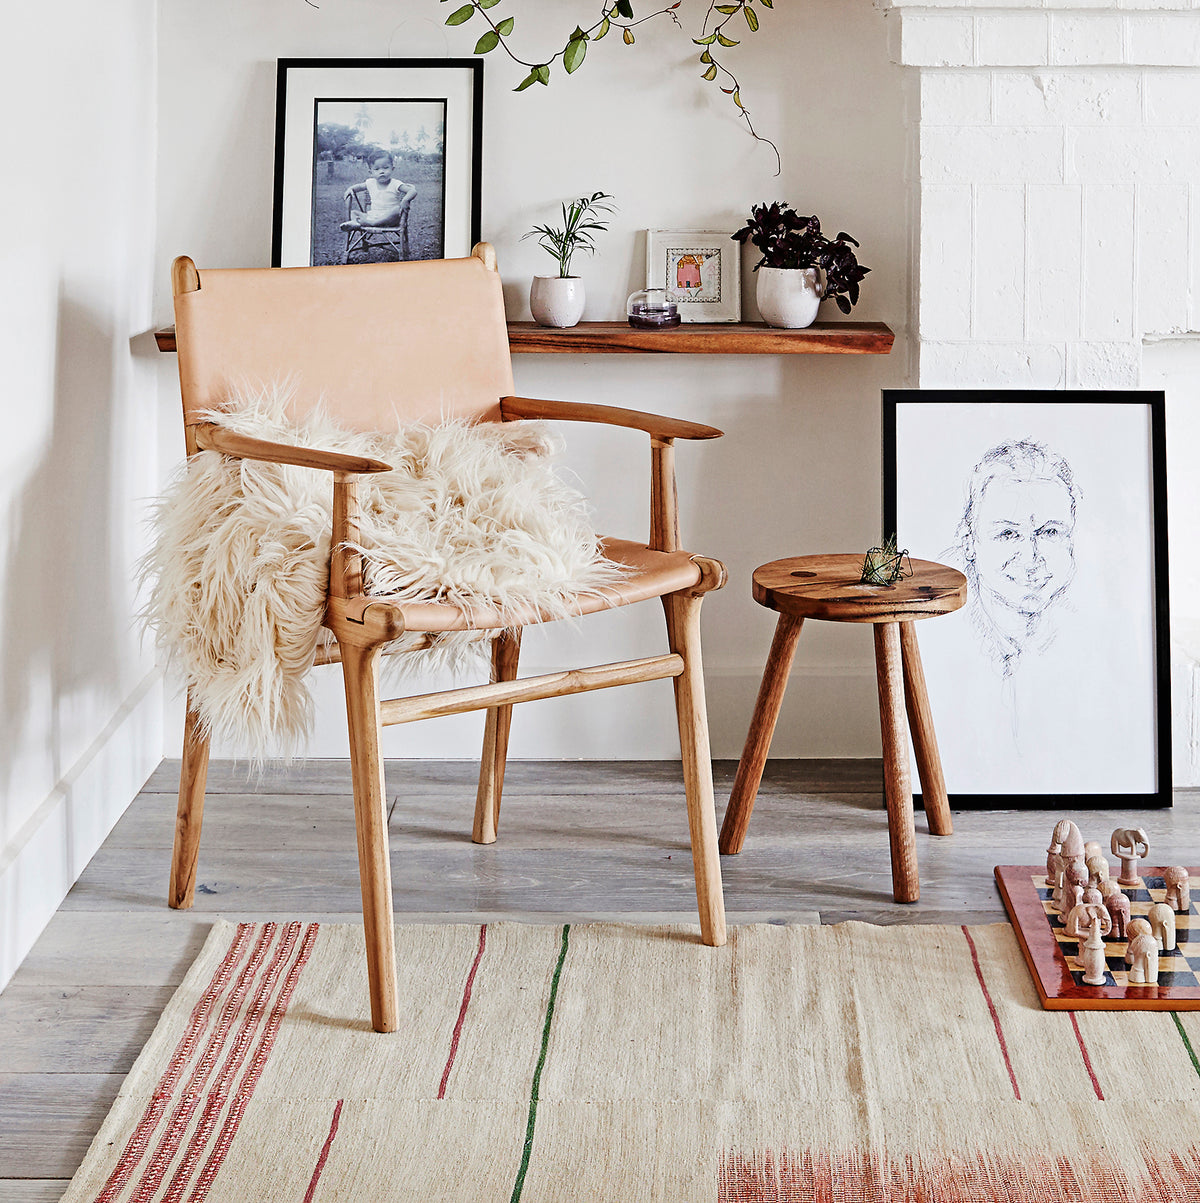 Minimalism Meets Whimsy in this Scandinavian Style Melbourne Bungalow